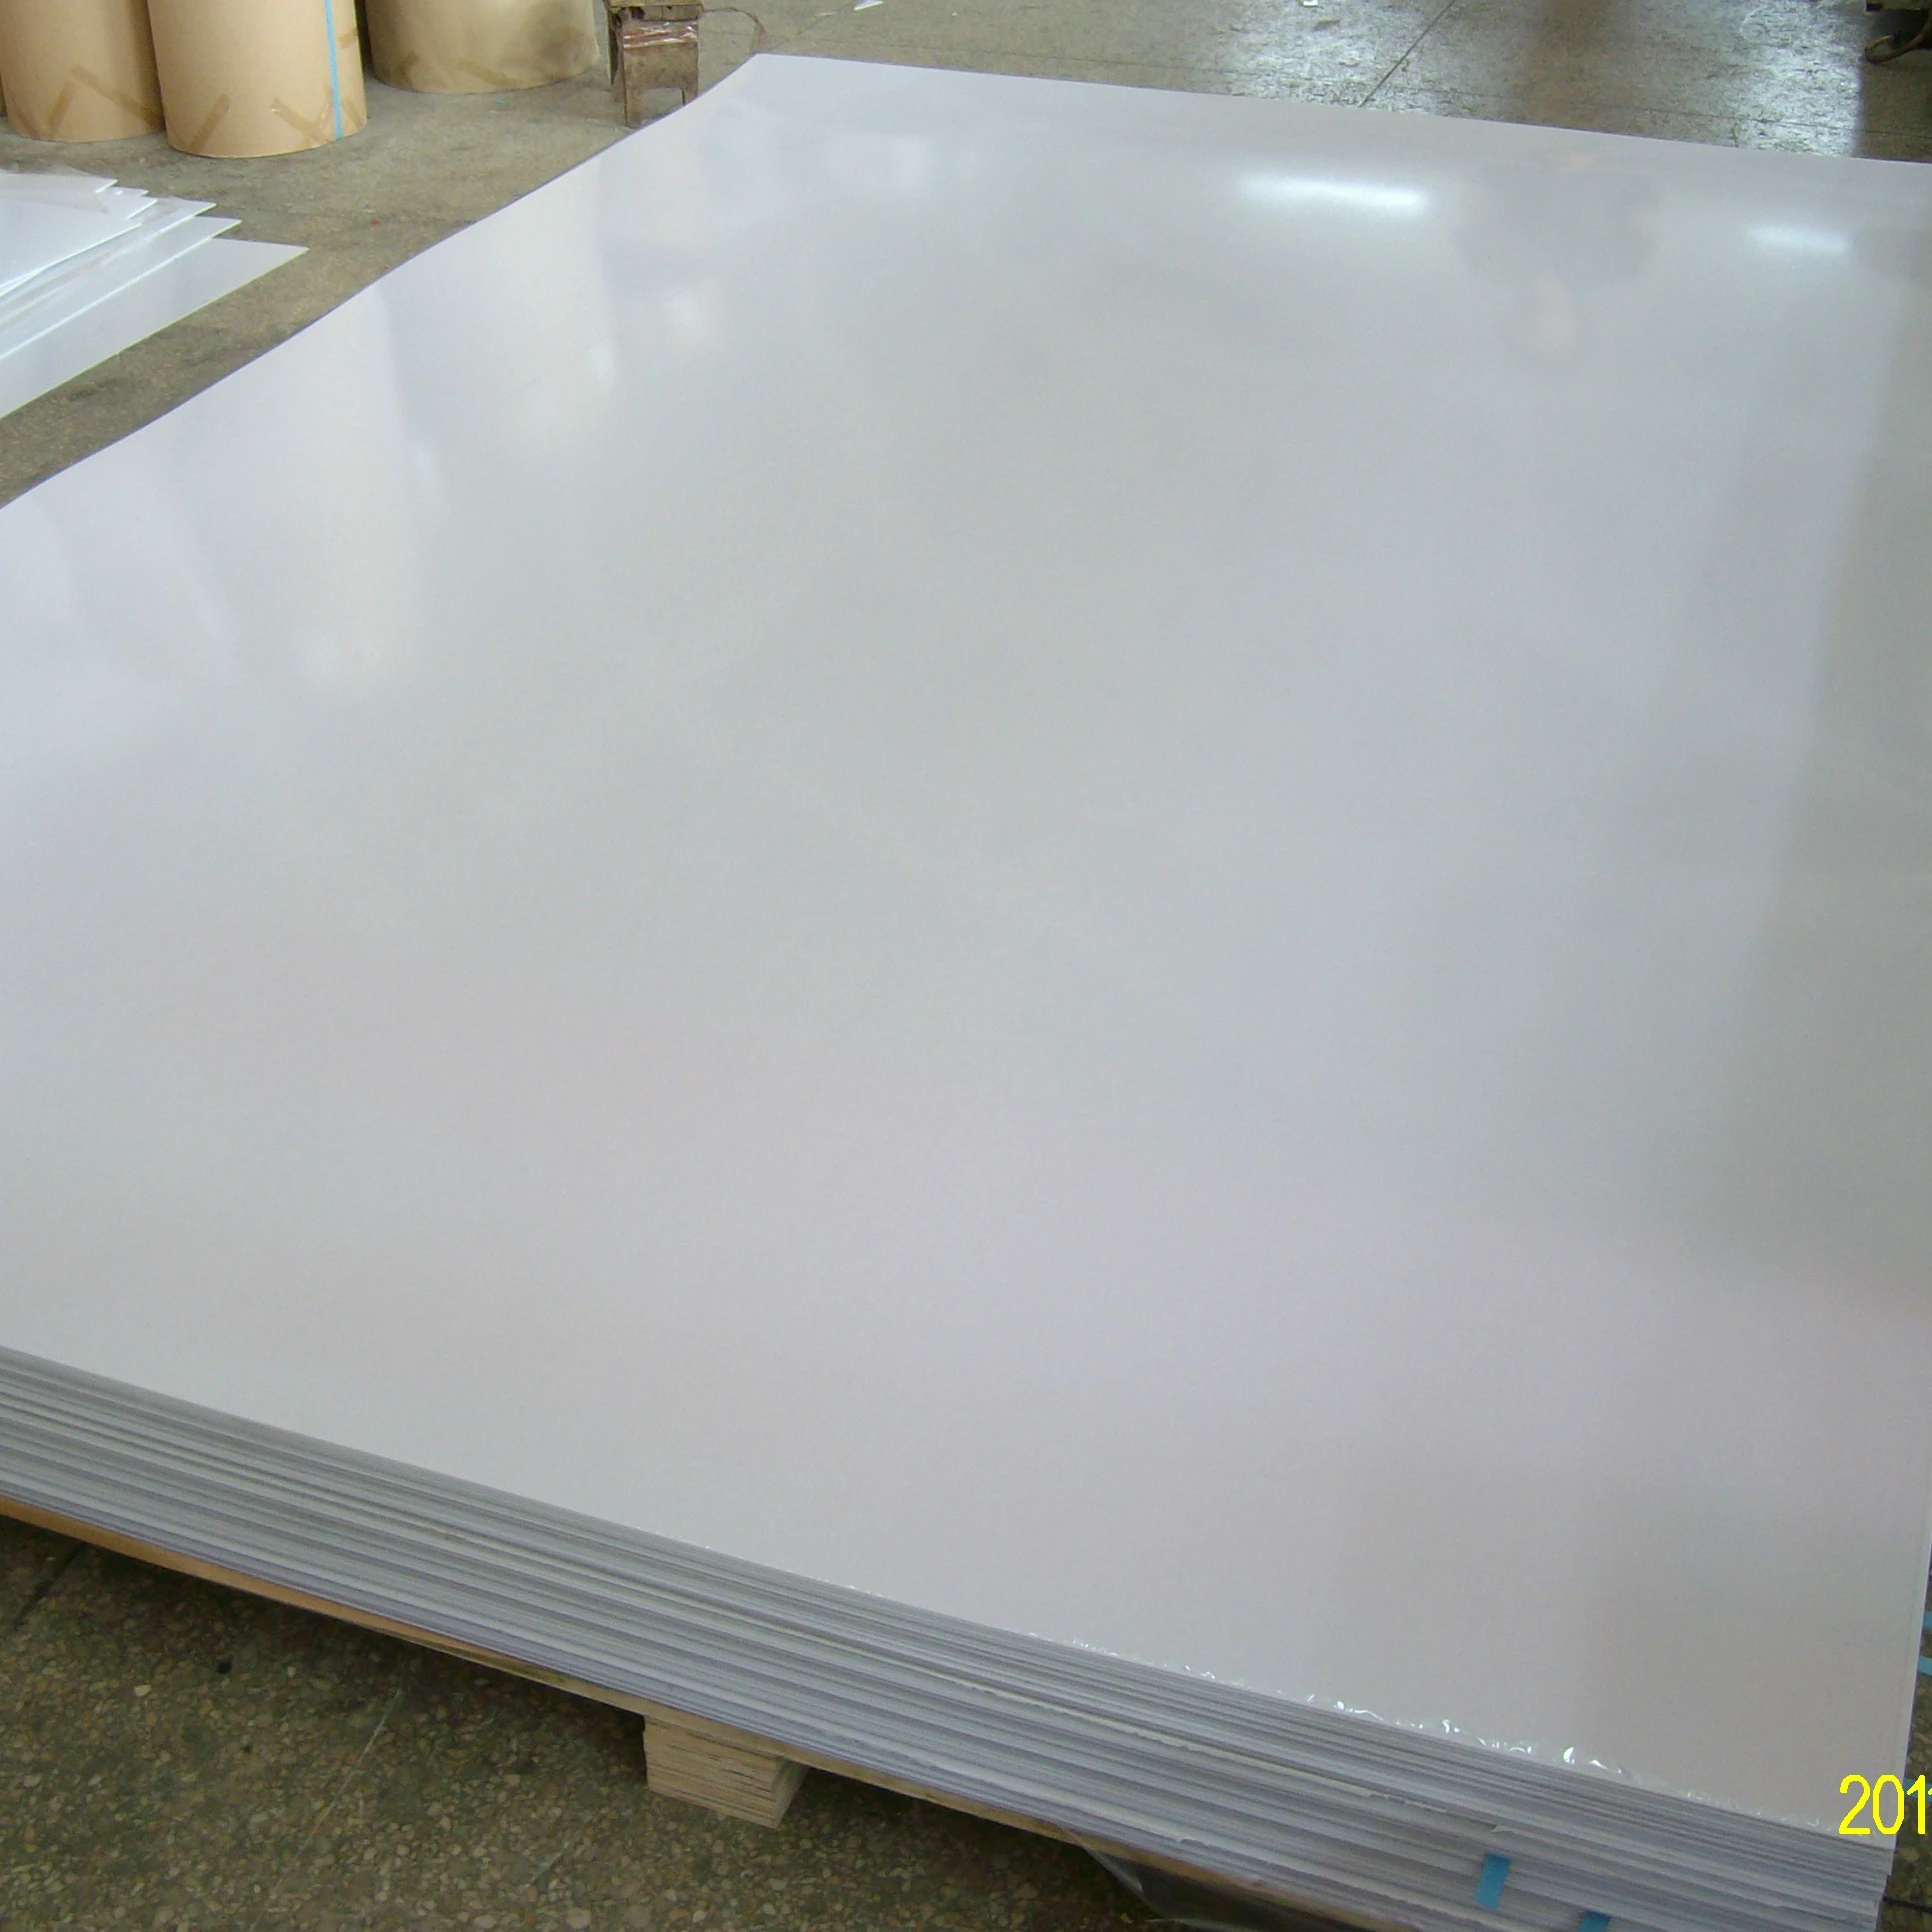 
Transparent color 0.9mm 1mm 2mm 3 mm pet sheet 2050 x 3050 mm clear apet sheet glossy and embossed matte post material big size 